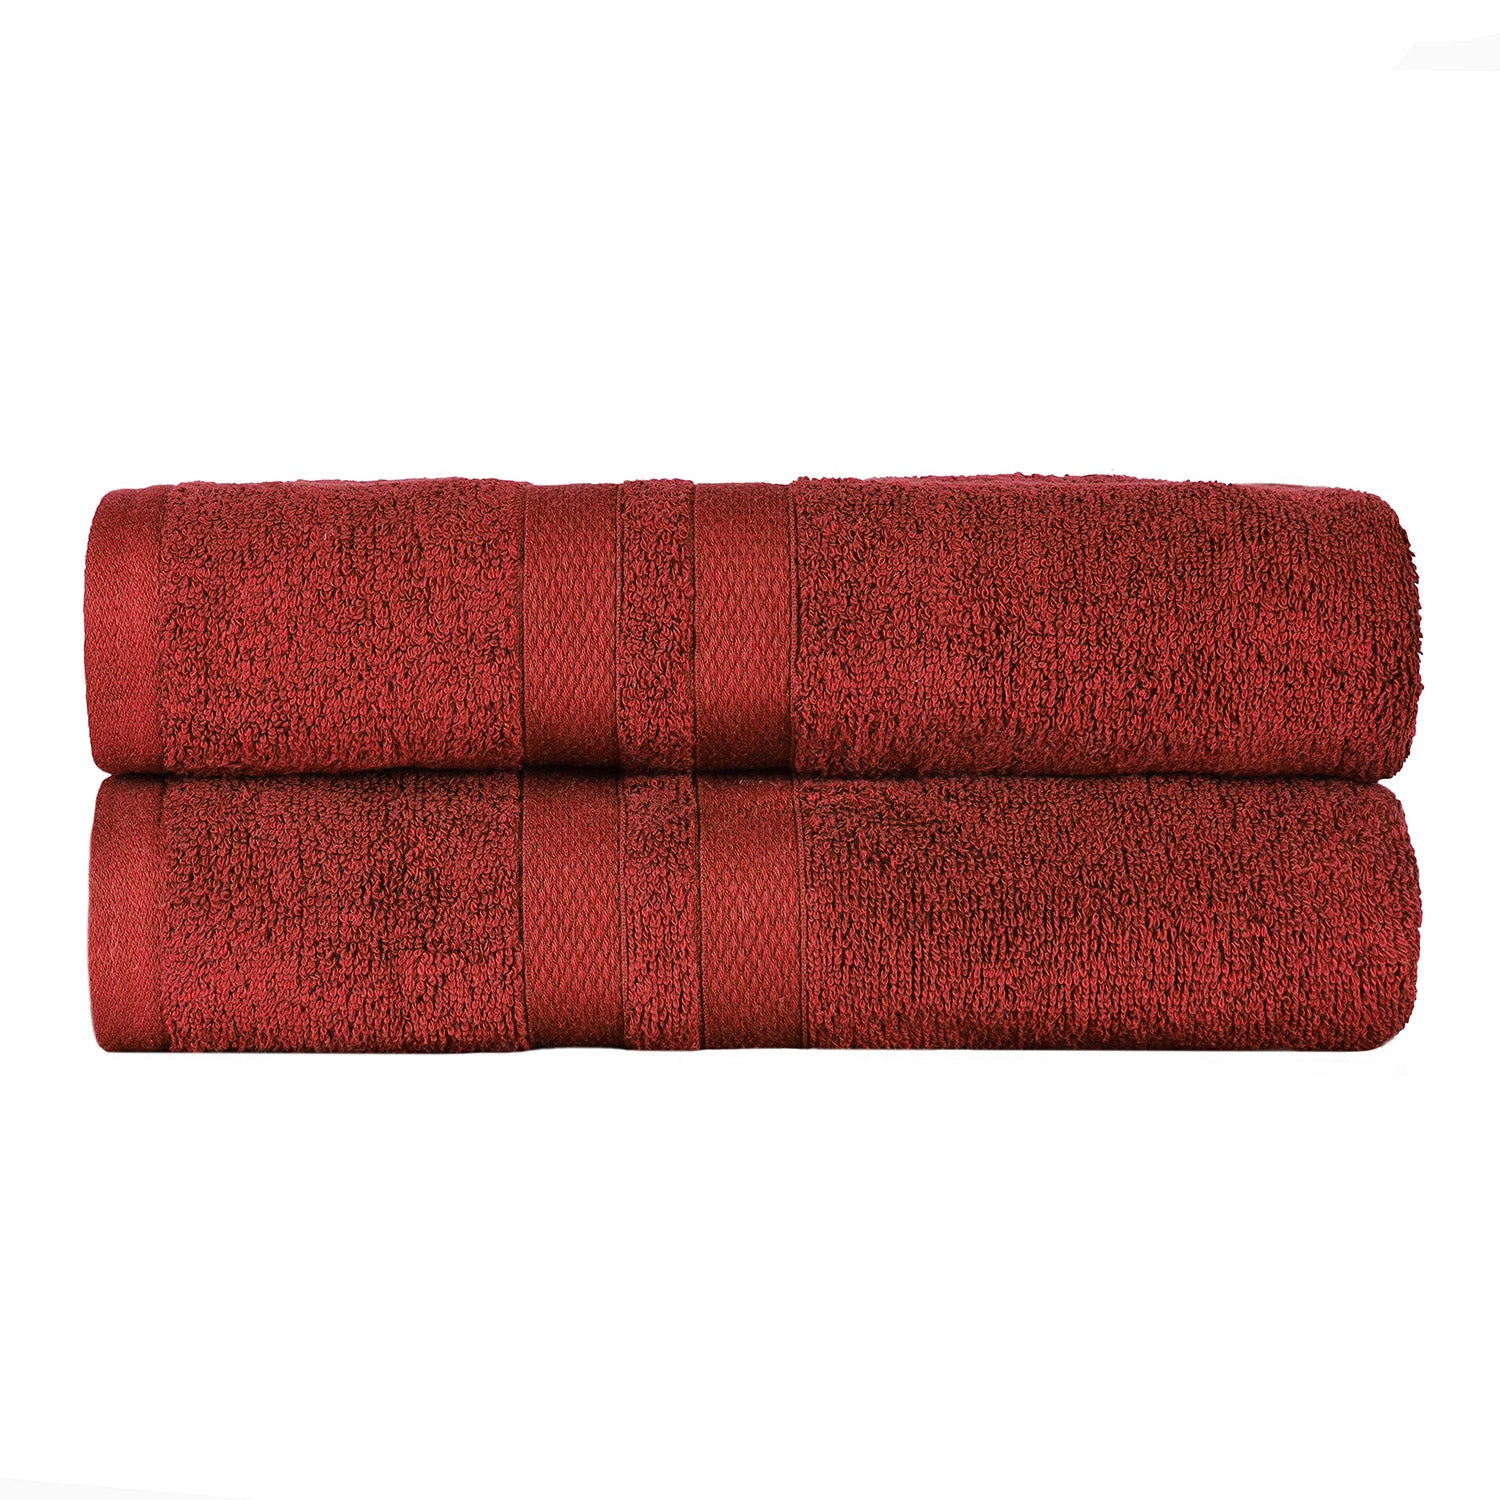 Superior Ultra Soft Cotton Absorbent Solid Bath Sheet (Set of 2) -  Maroon